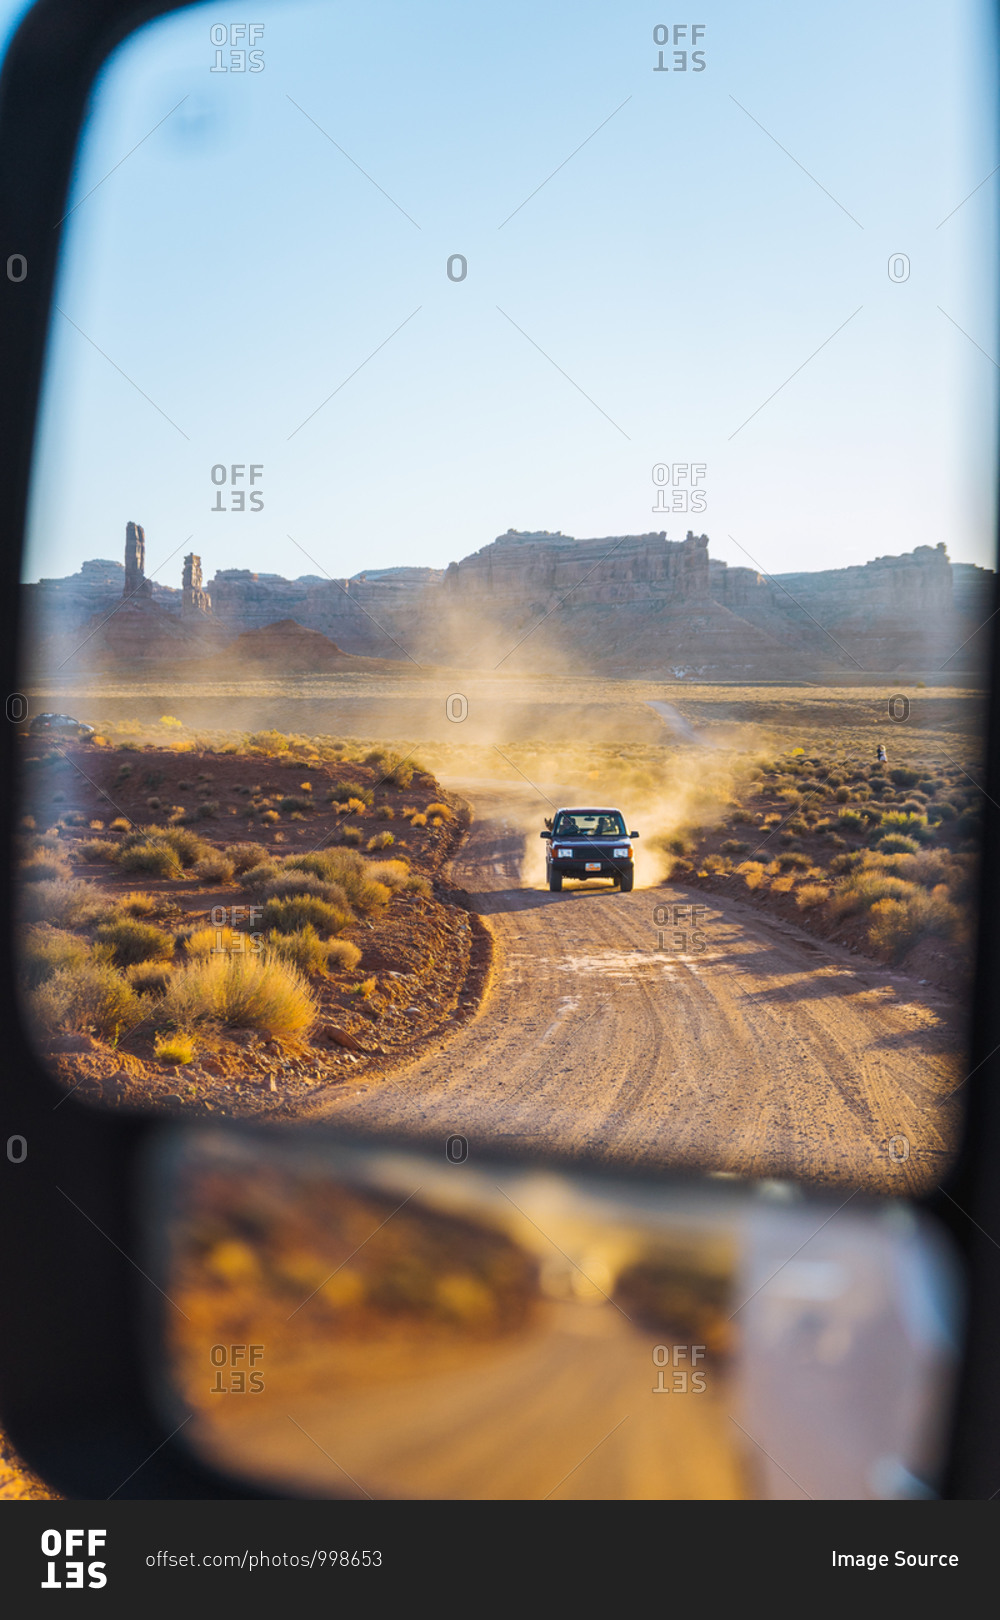 Off road vehicle driving through Valley of the Gods, Utah, US